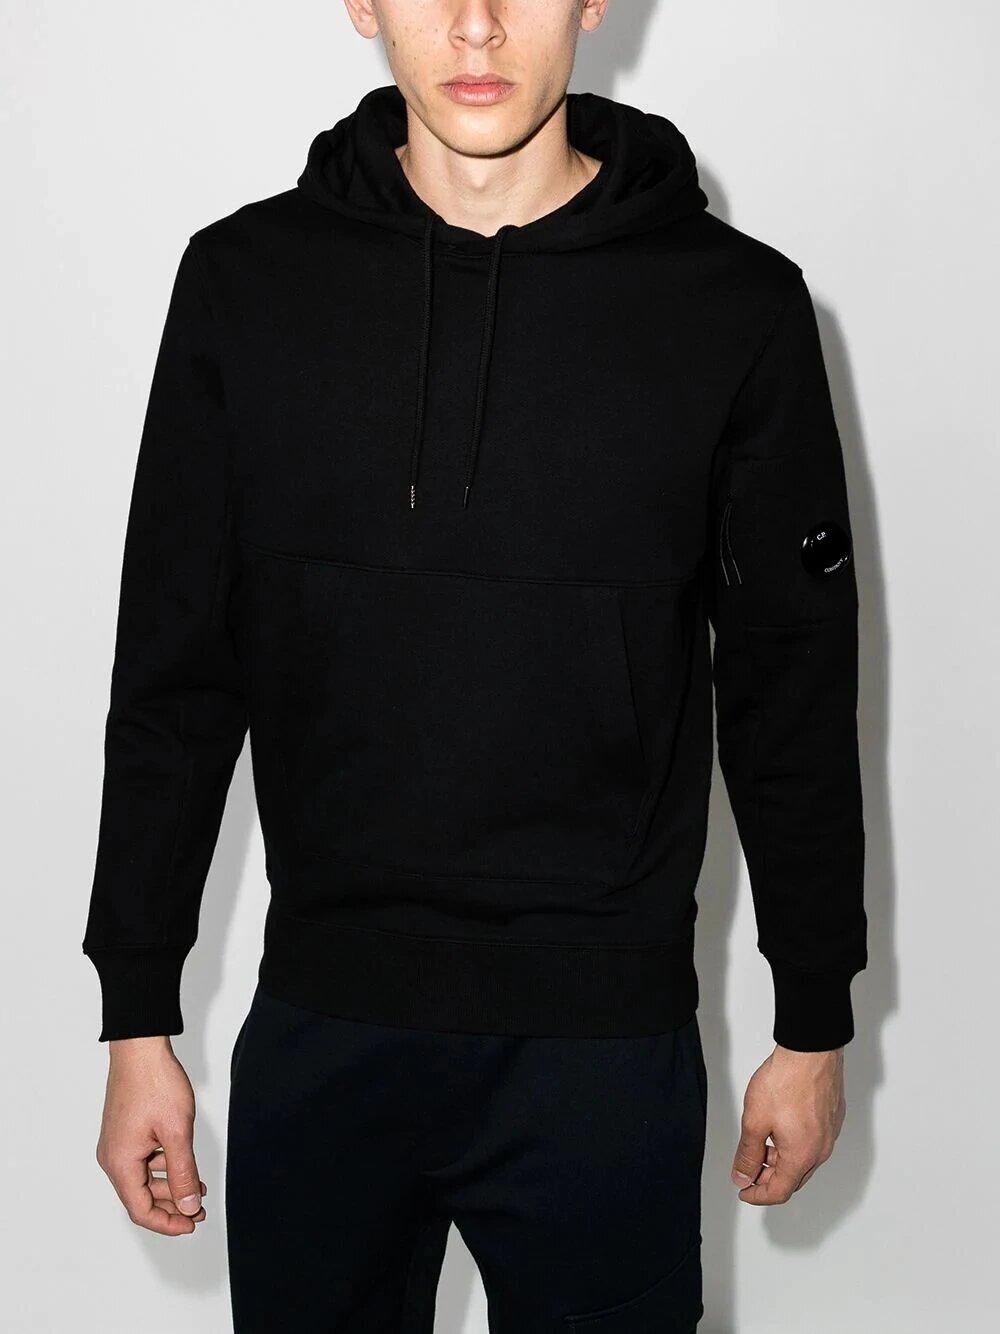 Company Cotton C.p C.P Company Hoodie & Diagonal joggers Tracksuit in Black for Men gym and workout clothes Tracksuits and sweat suits Mens Clothing Activewear 